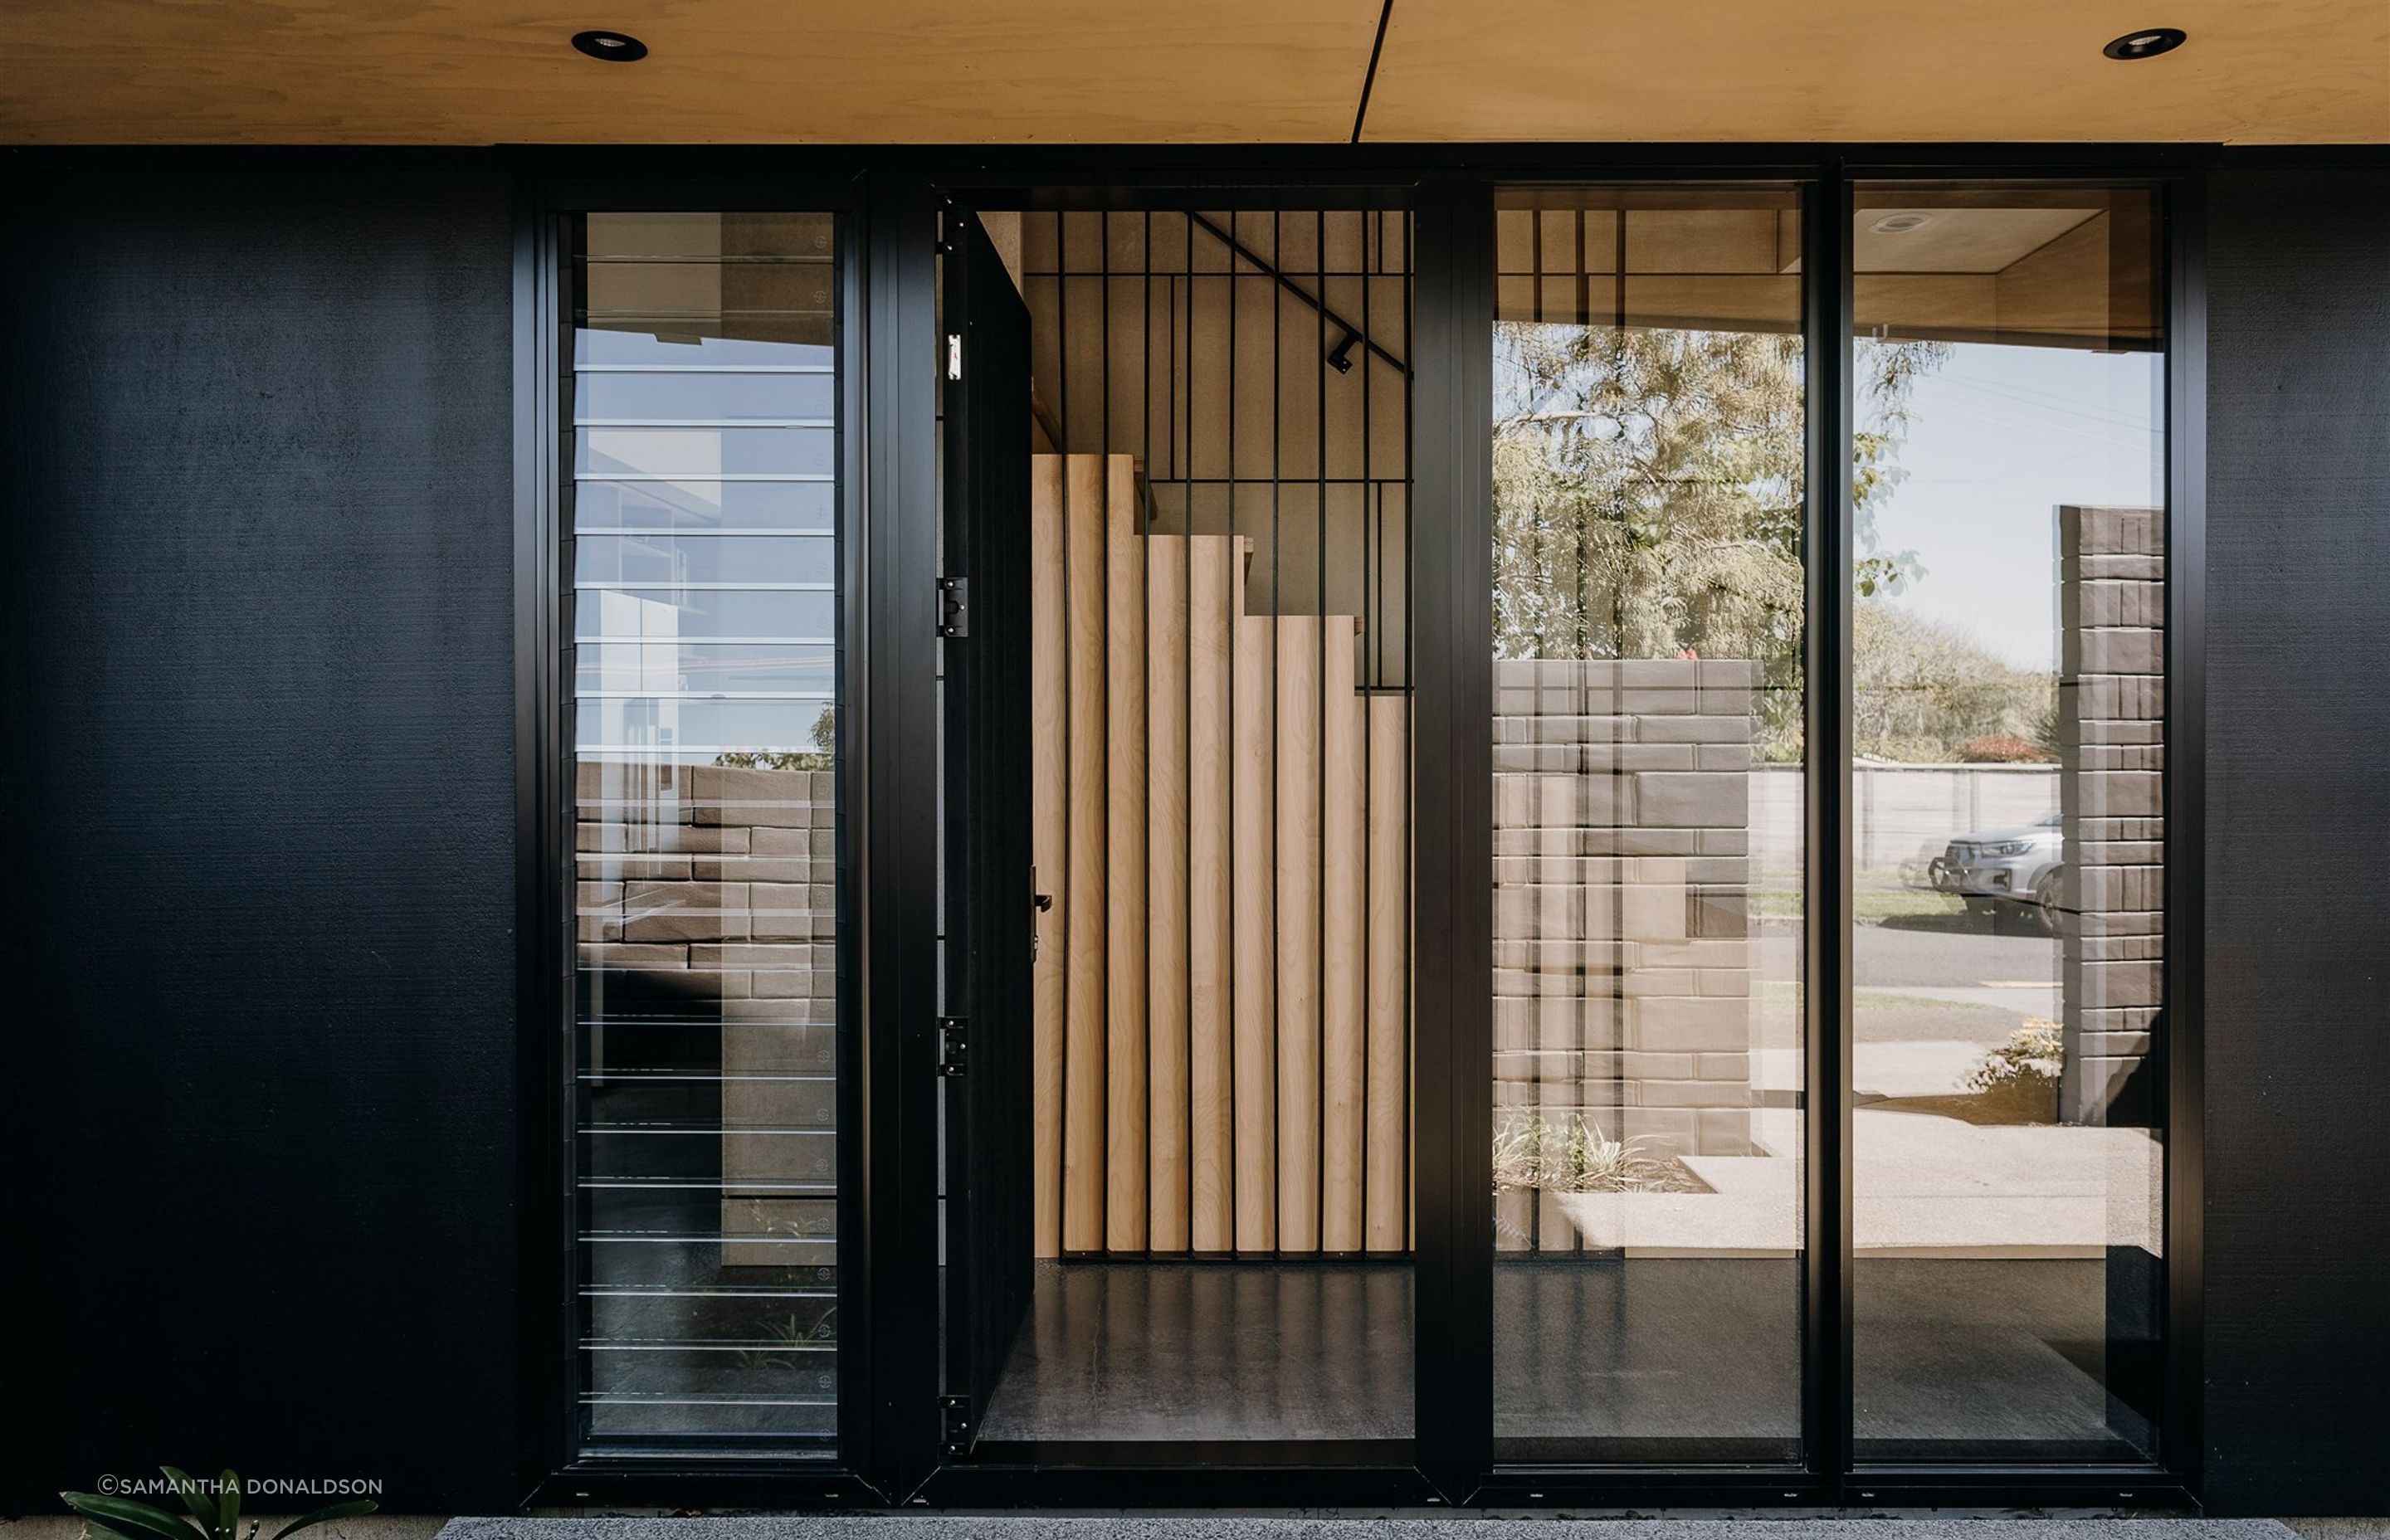 A floated concrete floor, black steel fins and a timber stair continue the material palette of the exterior. 